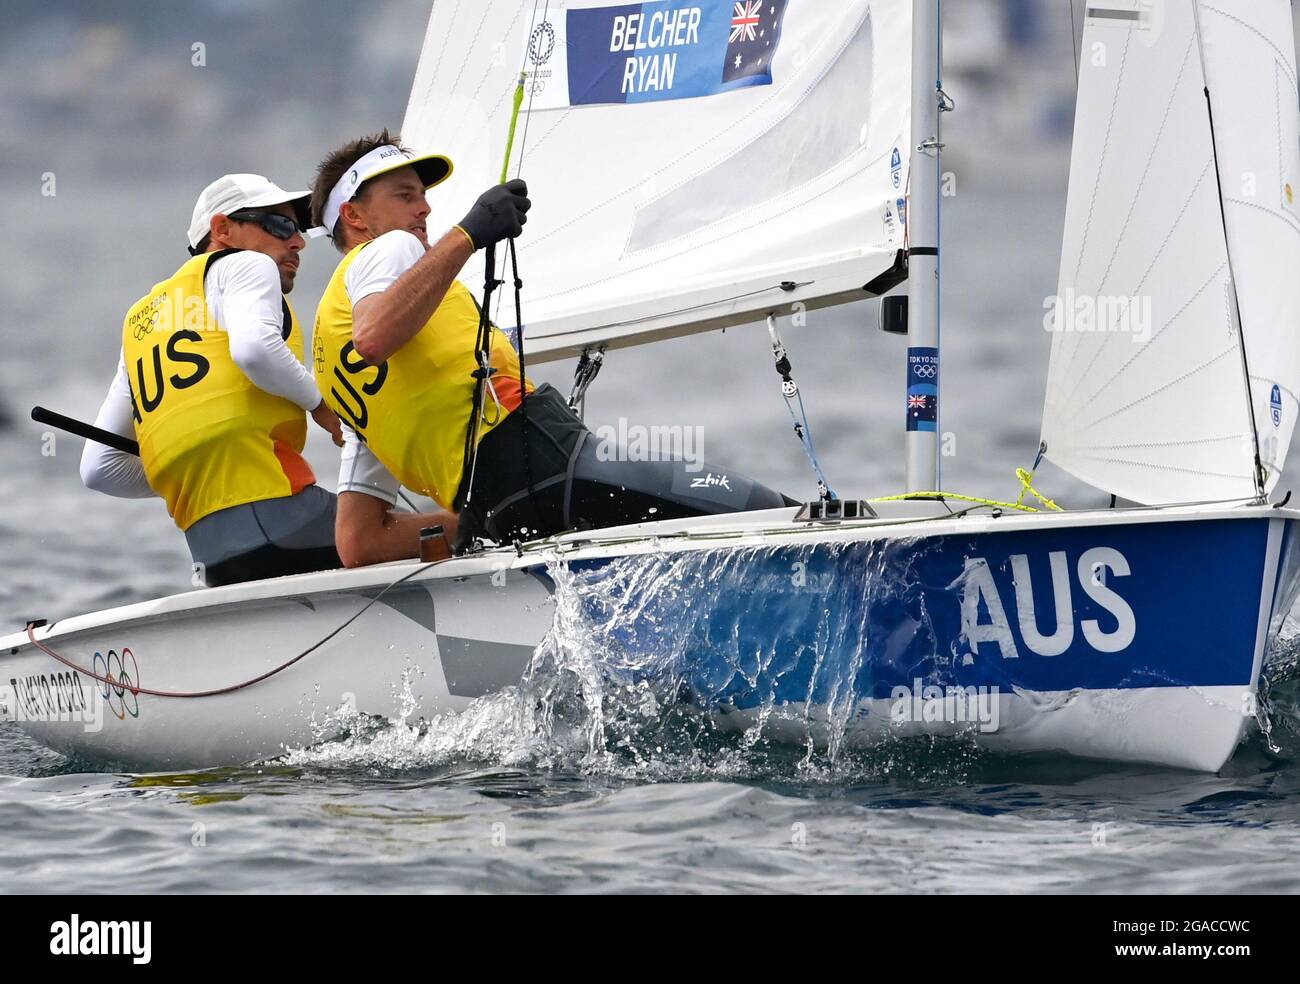 Kanagawa, Japan. 30th July, 2021. Mathew Belcher/Will Ryan (R) of Australia compete during the Men's Two Person Dinghy 470 at the Tokyo 2020 Olympic Games in Kanagawa, Japan, July 30, 2021. Credit: Huang Zongzhi/Xinhua/Alamy Live News Stock Photo